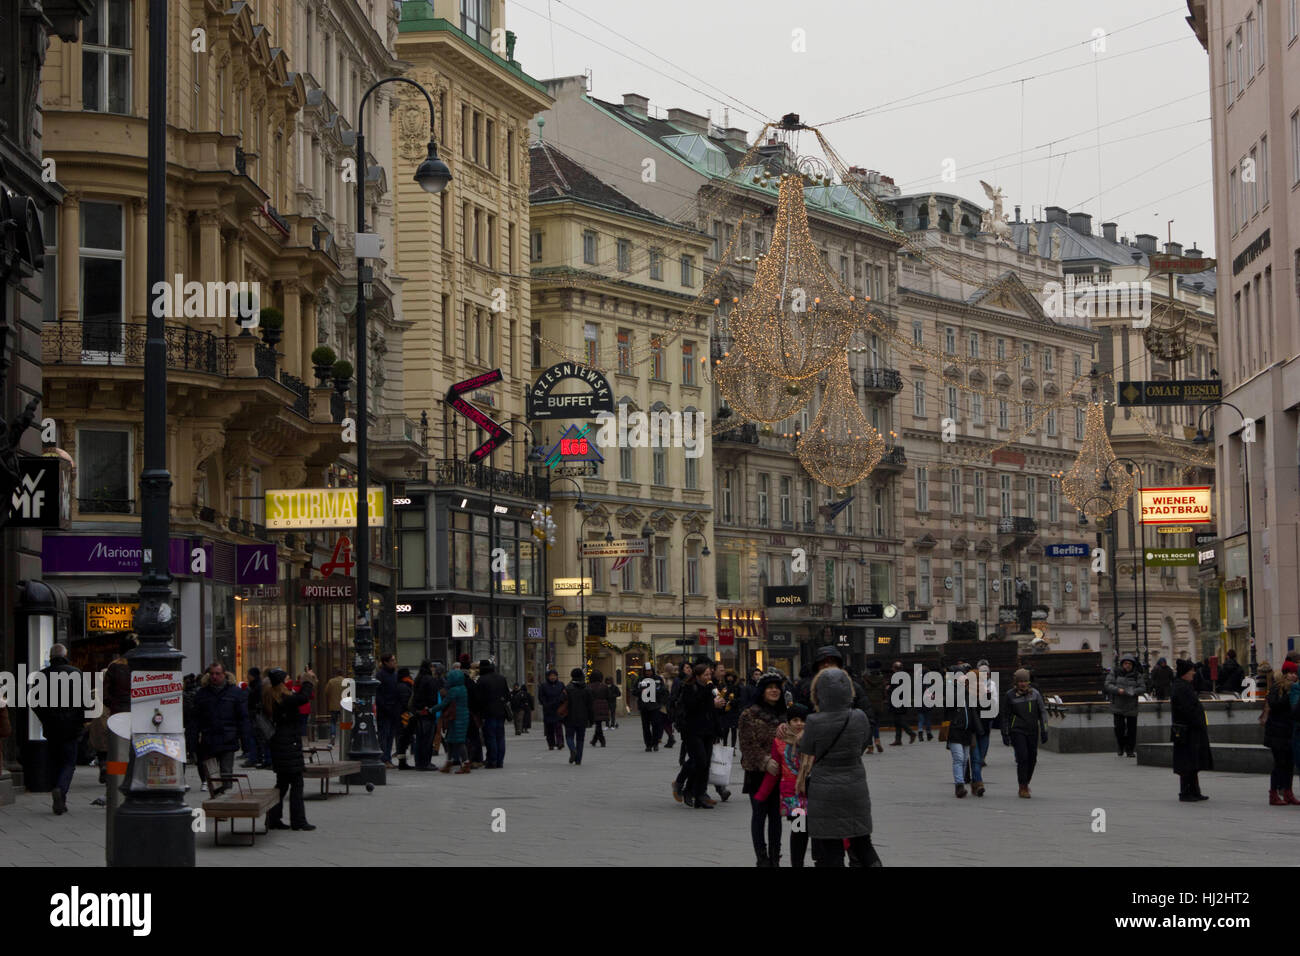 VIENNA, AUSTRIA - JANUARY 3 2016: Day view of Graben street in Vienna in the late afternoon, with the light decoration on and people around Stock Photo